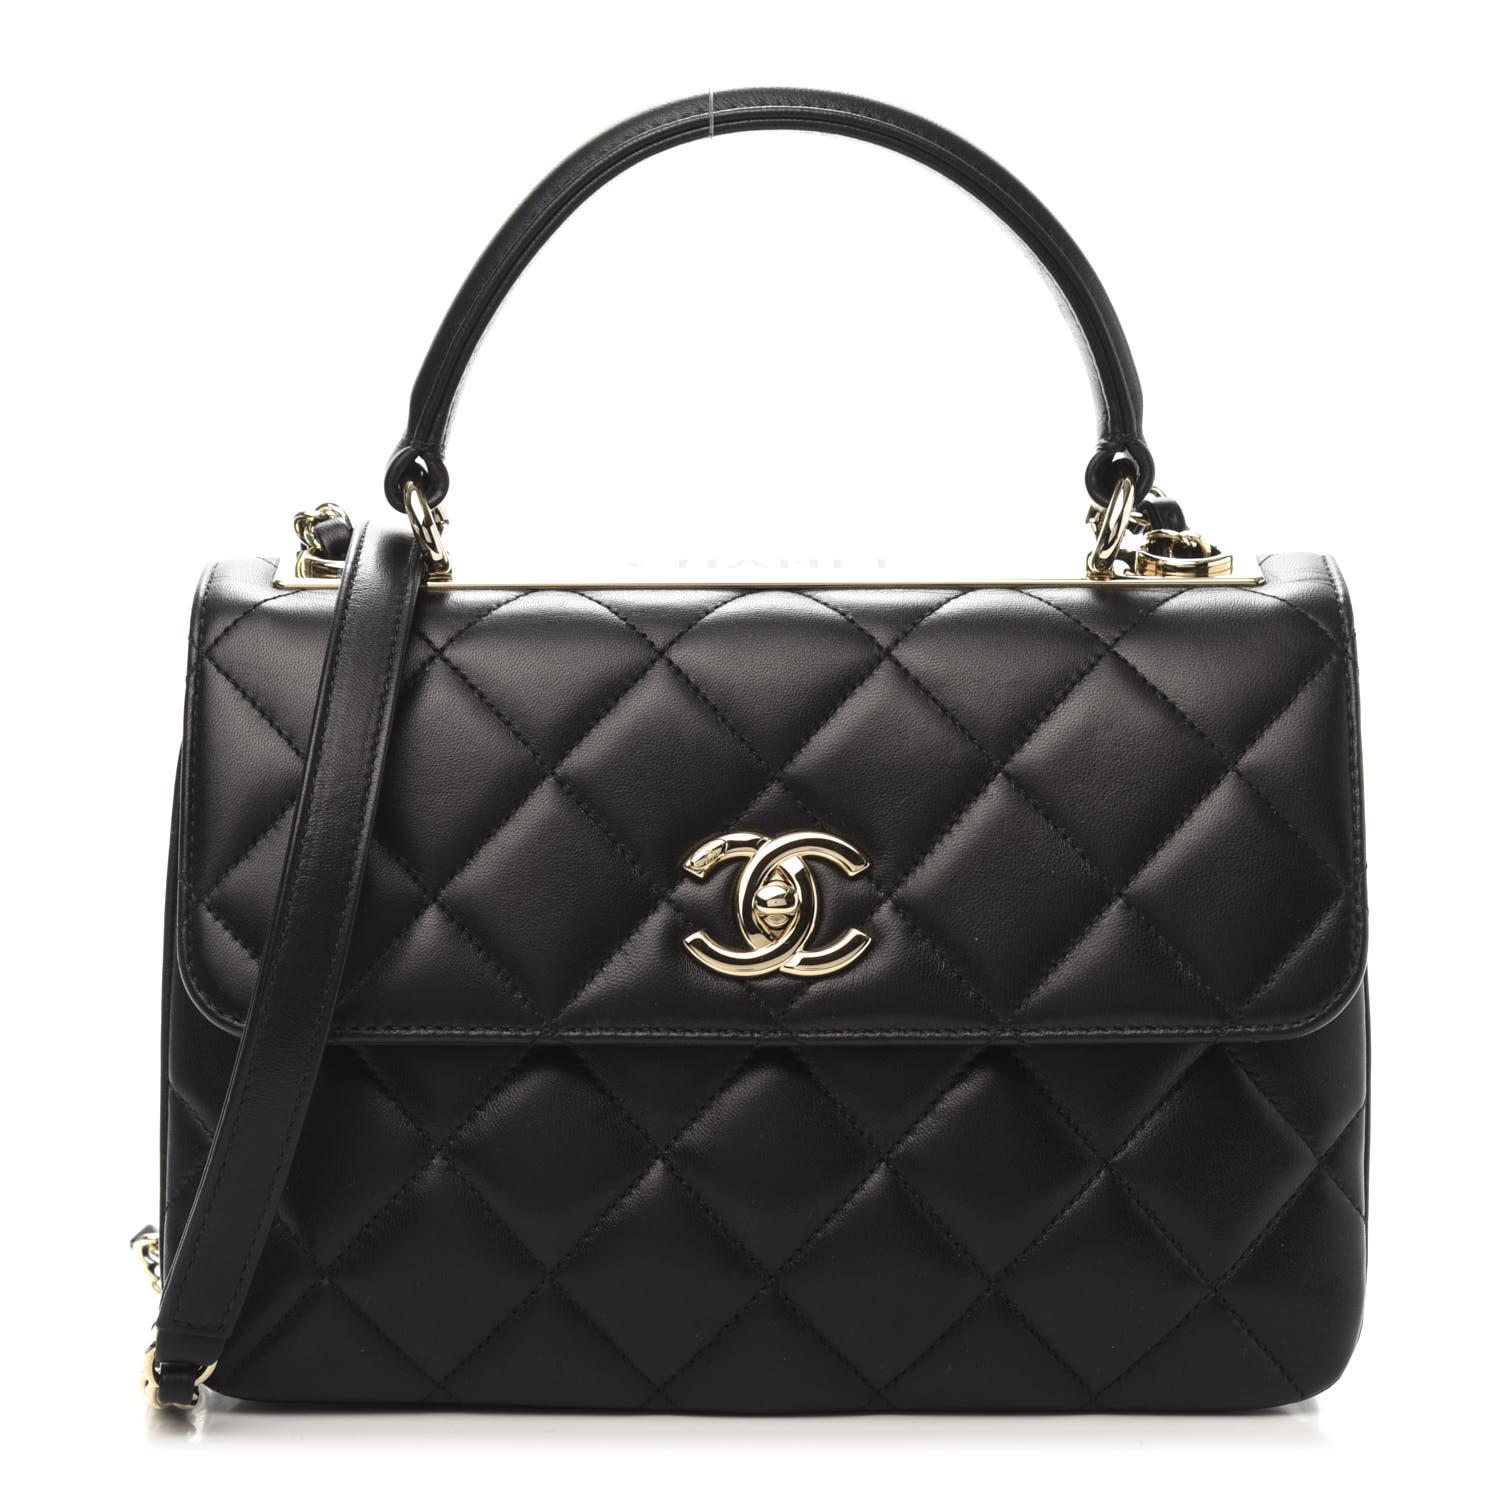 This stylish handbag is made of diamond quilted lambskin leather in black. The bag features a reinforced leather top handle with a gold bar with a Chanel logo and a removable gold chain leather threaded shoulder strap with a shoulder pad. The flap